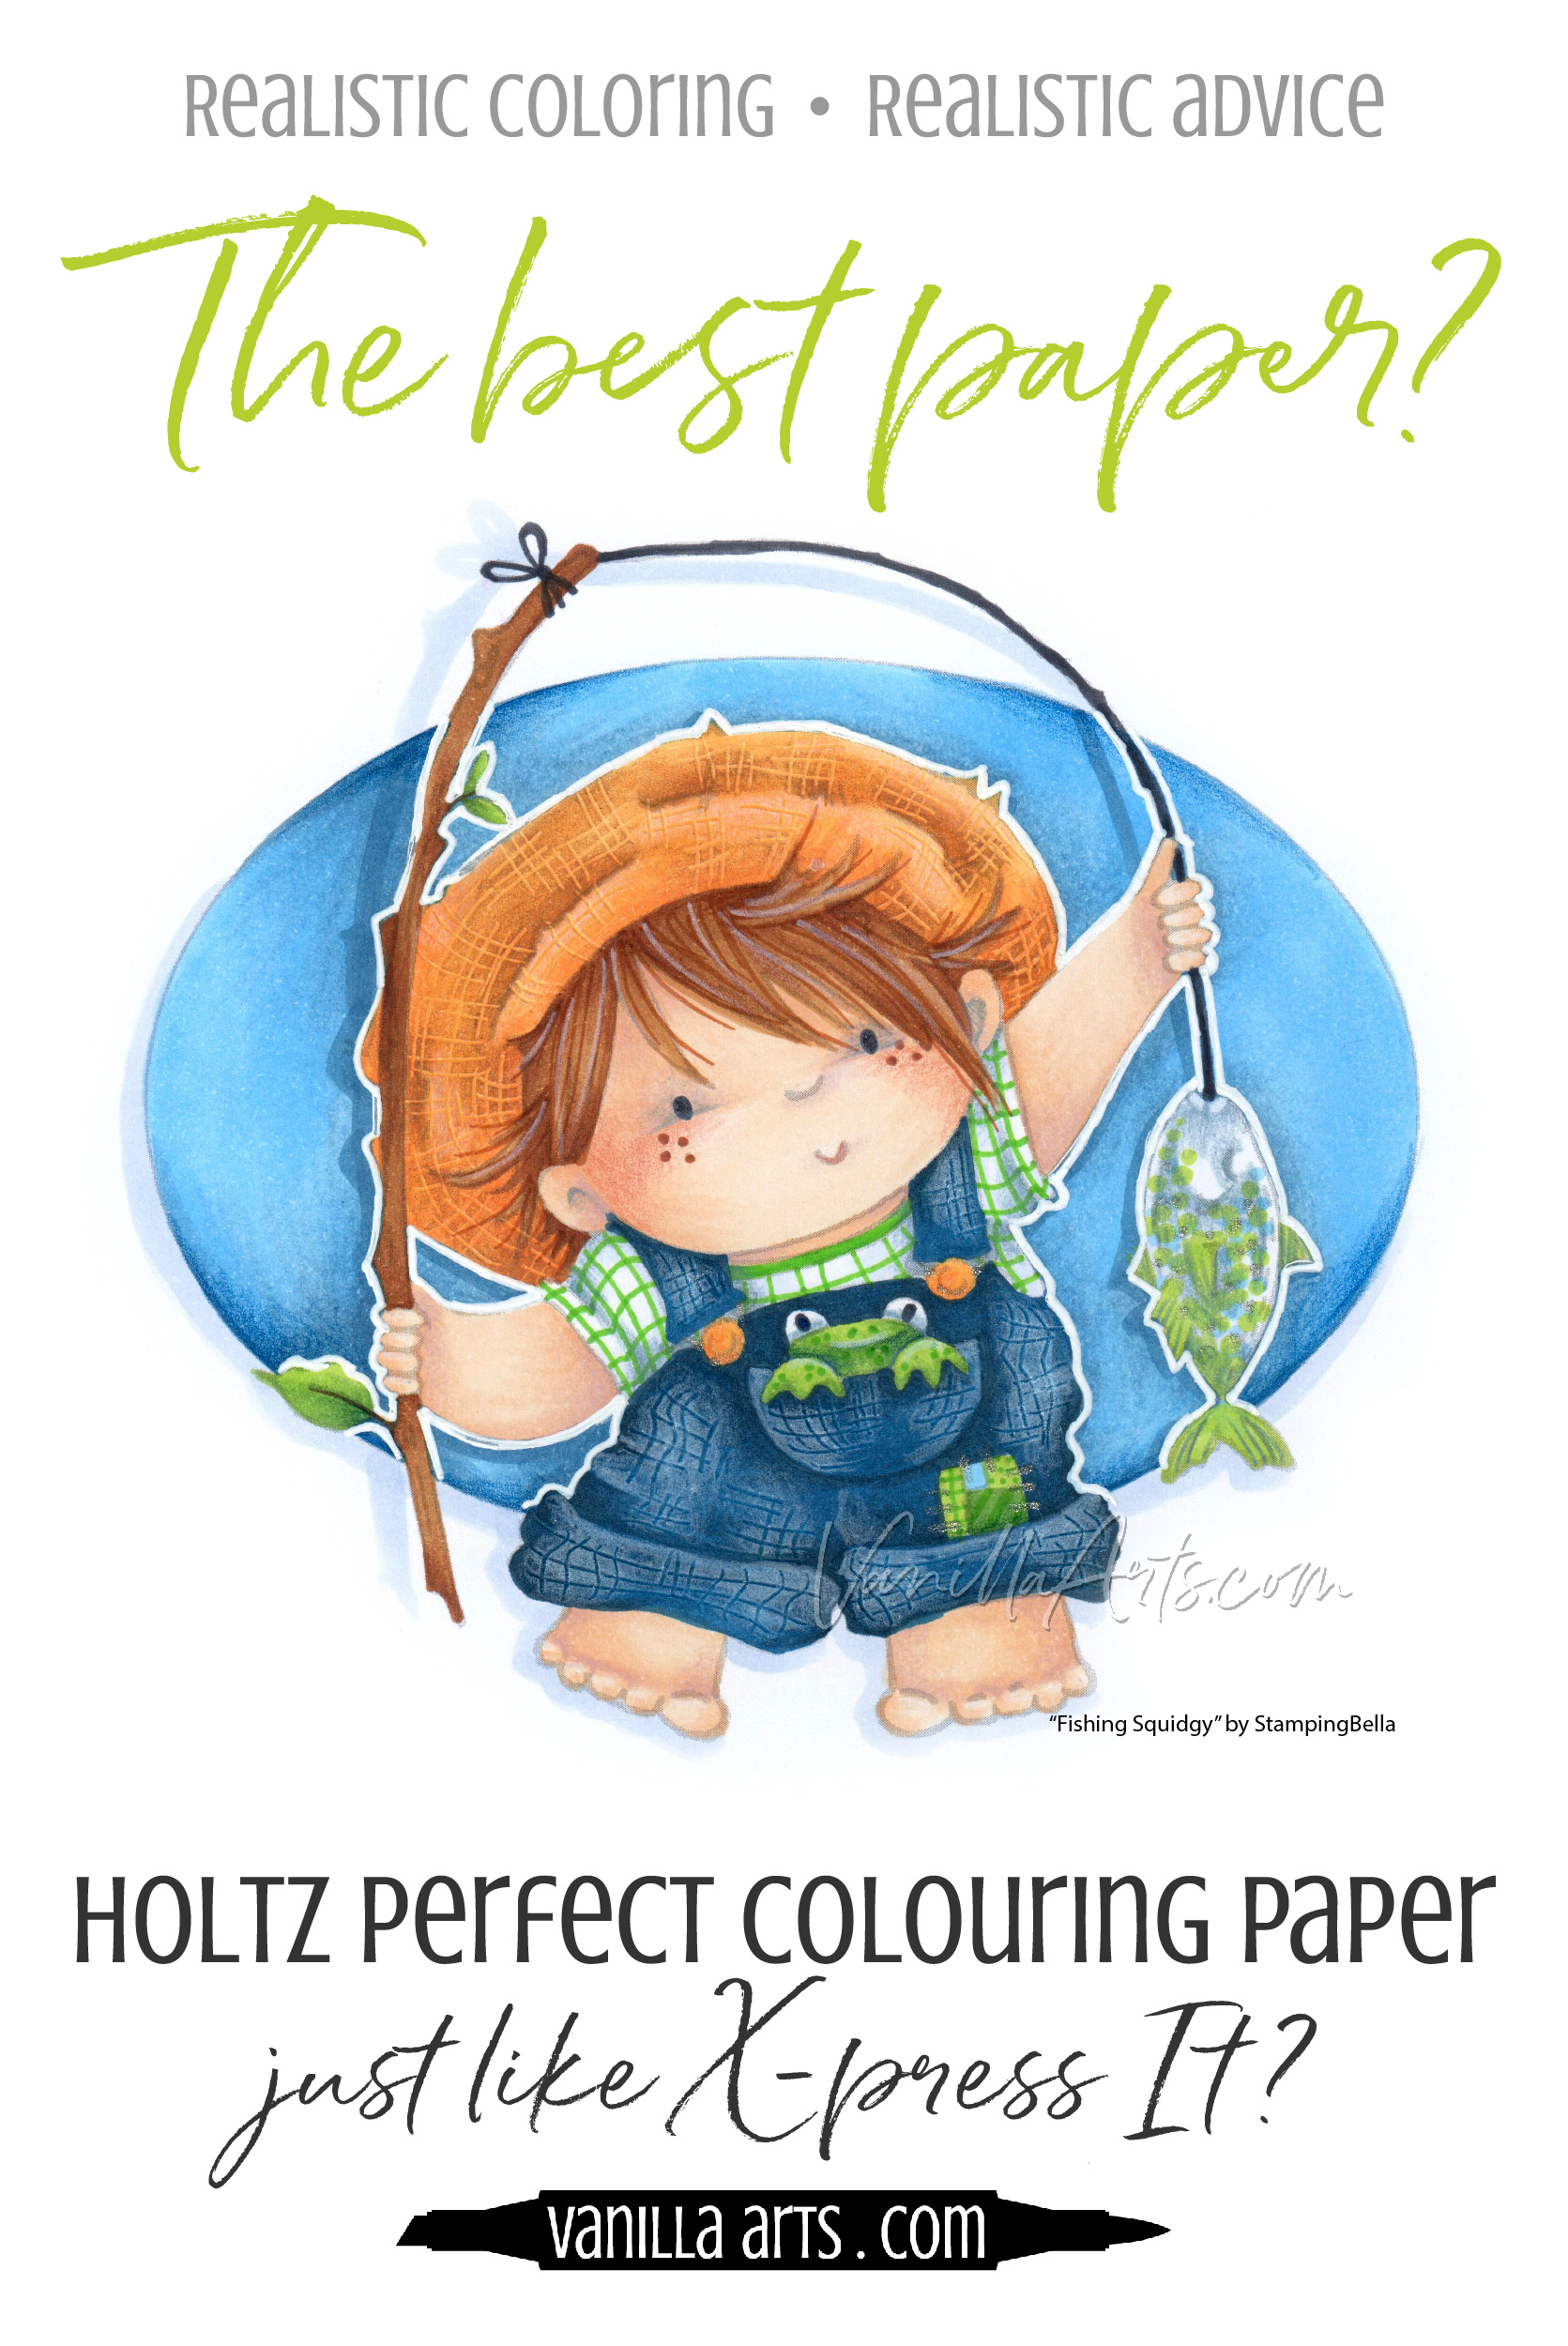 How To Choose The Right Paper For Coloring